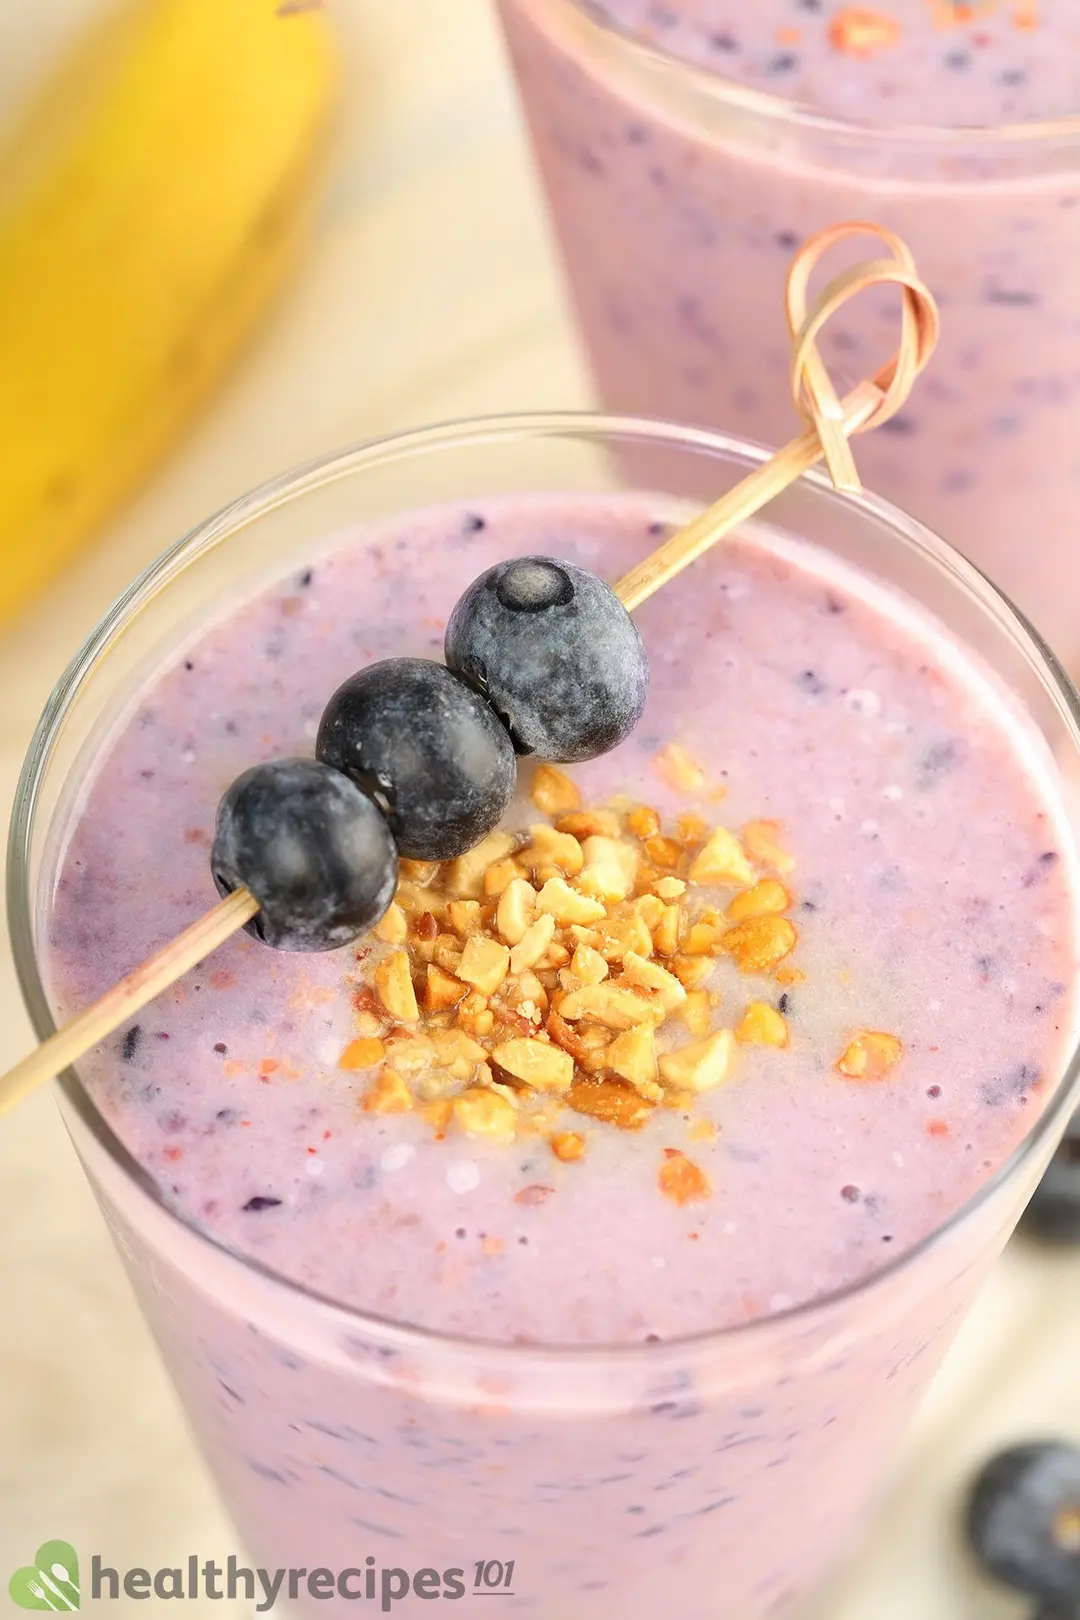 A close-up shot of a blueberry smoothie glass topped with a blueberry skewer and crushed peanuts